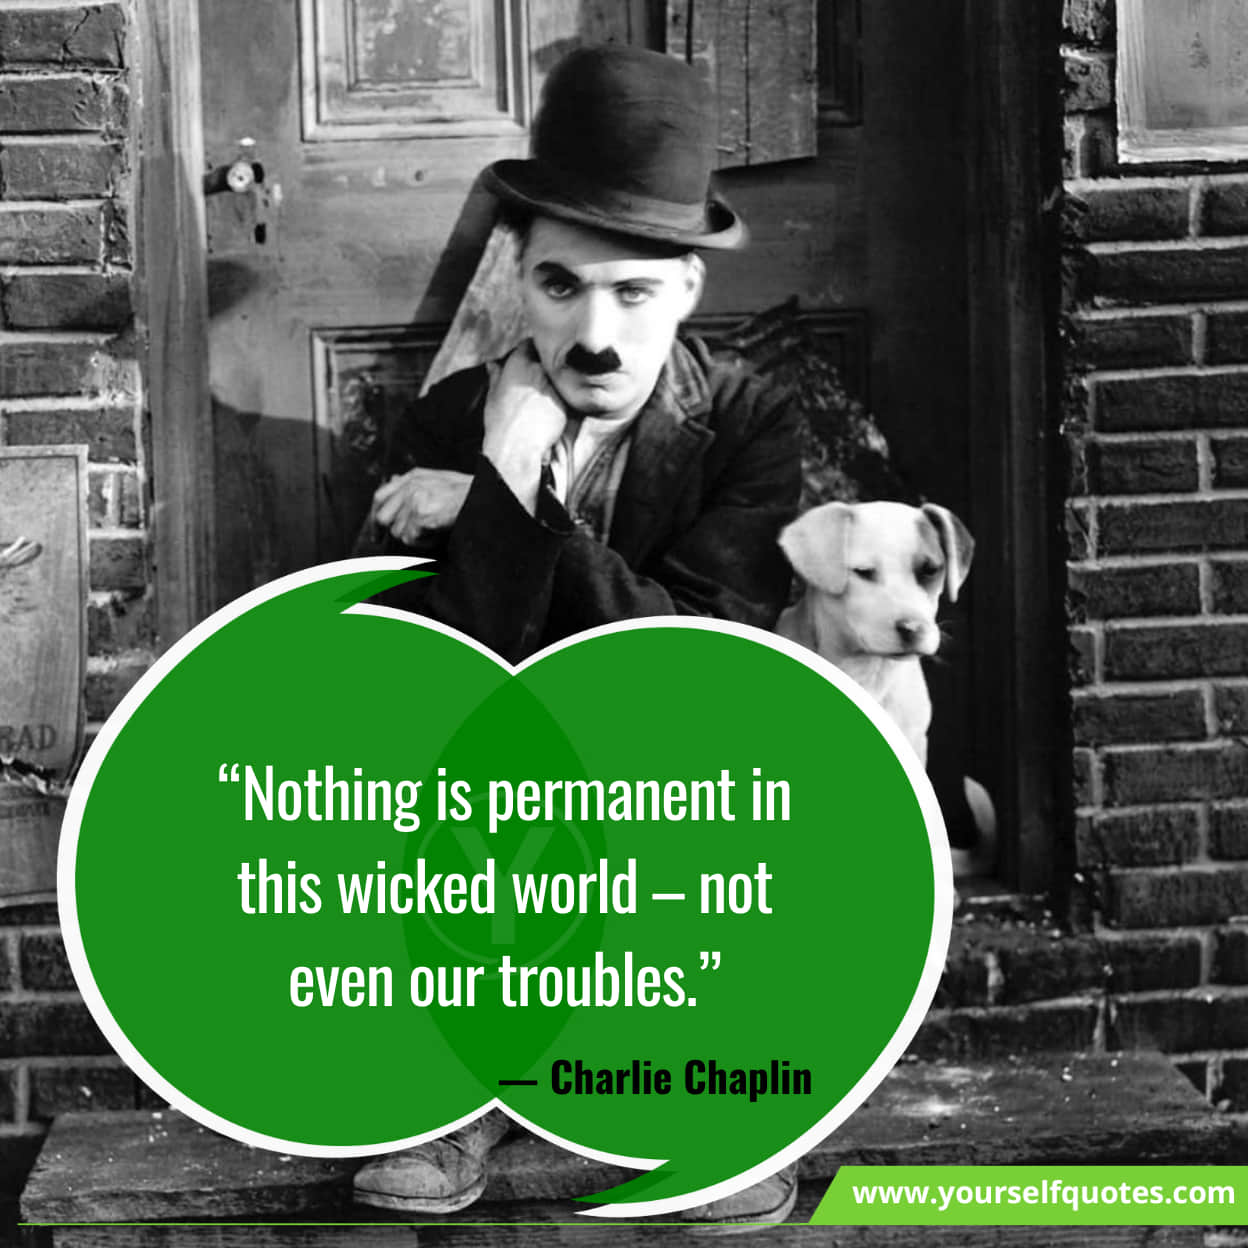 Charlie Chaplin Quotes For Joy In Life